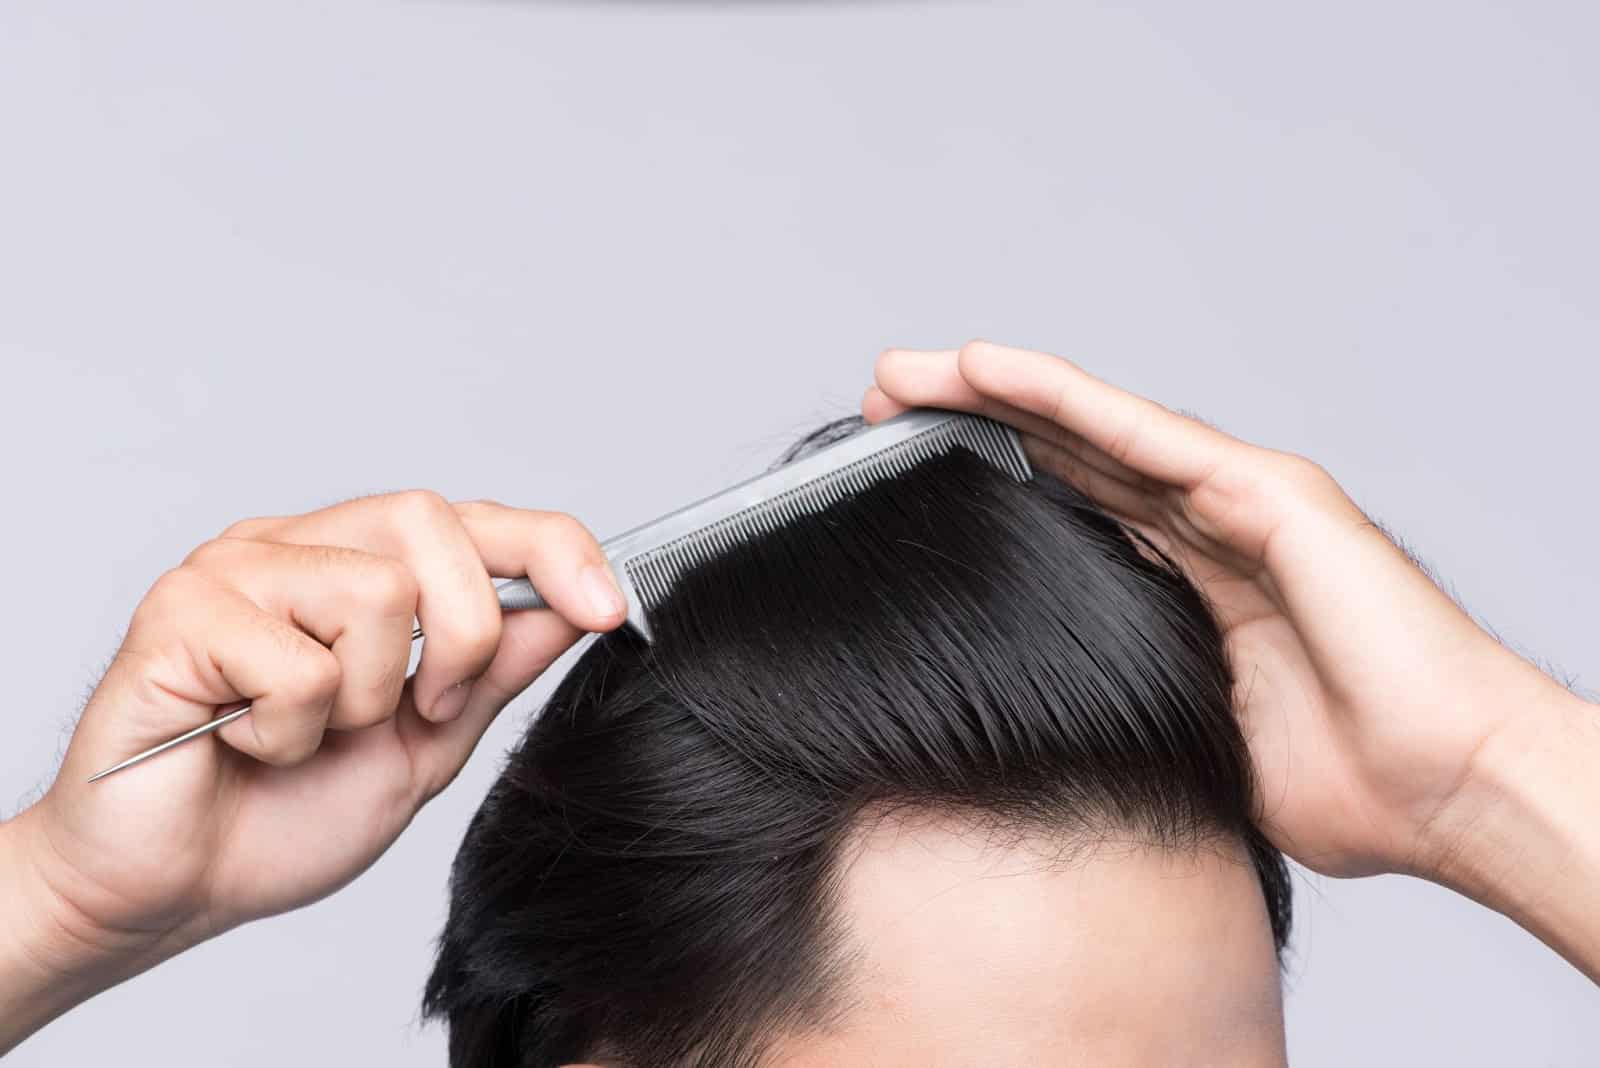 3 Myths About Washing Your Hair With Cold Water